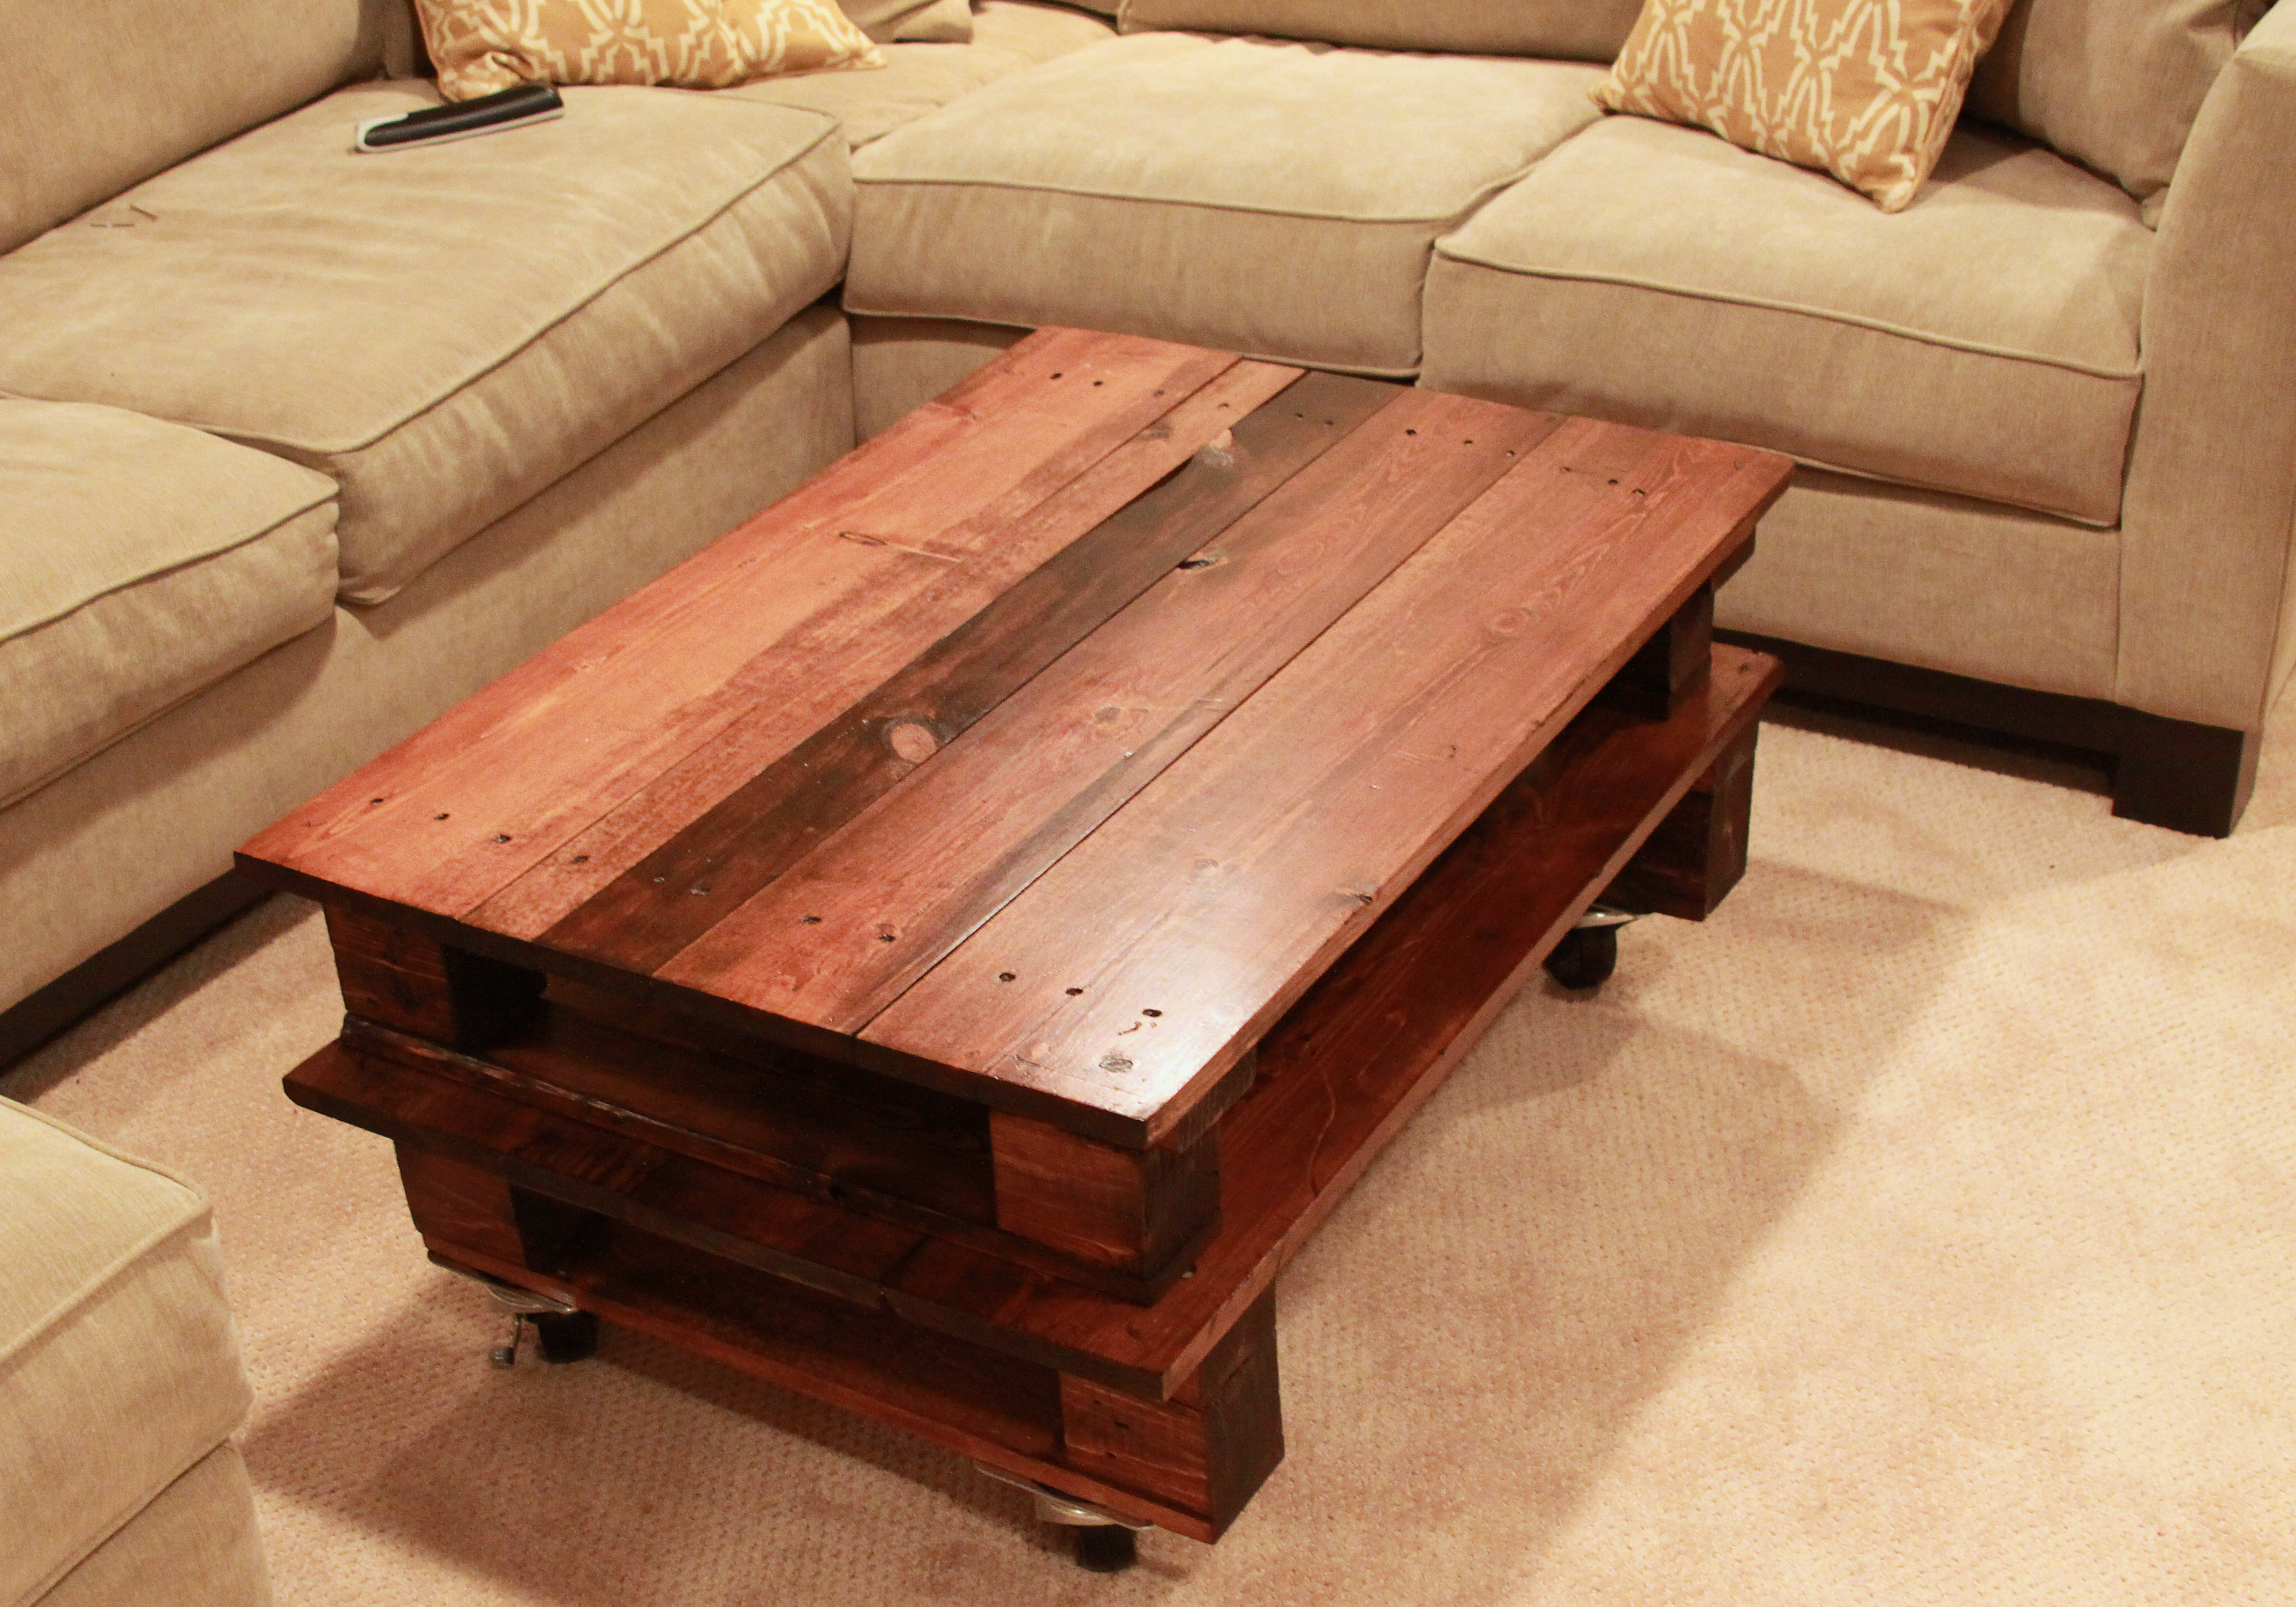 How to make a coffee table out of wood